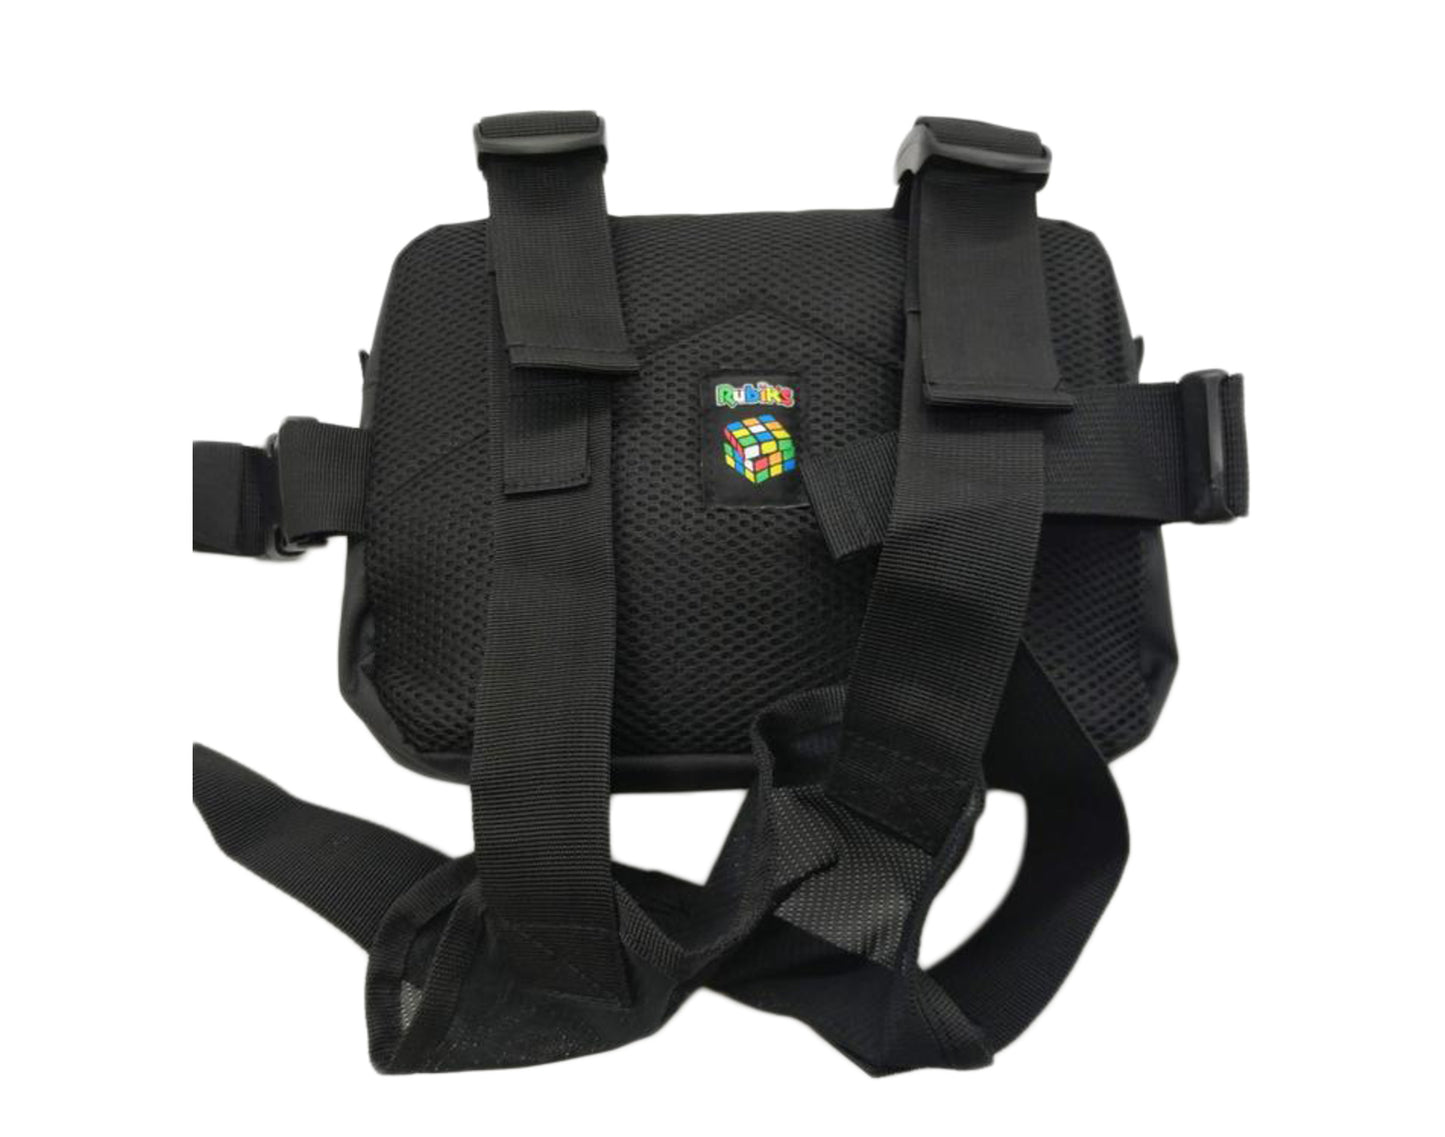 DeKryptic x Rubik's Unusual Suspects Augmented Reality Chest Rig Bag